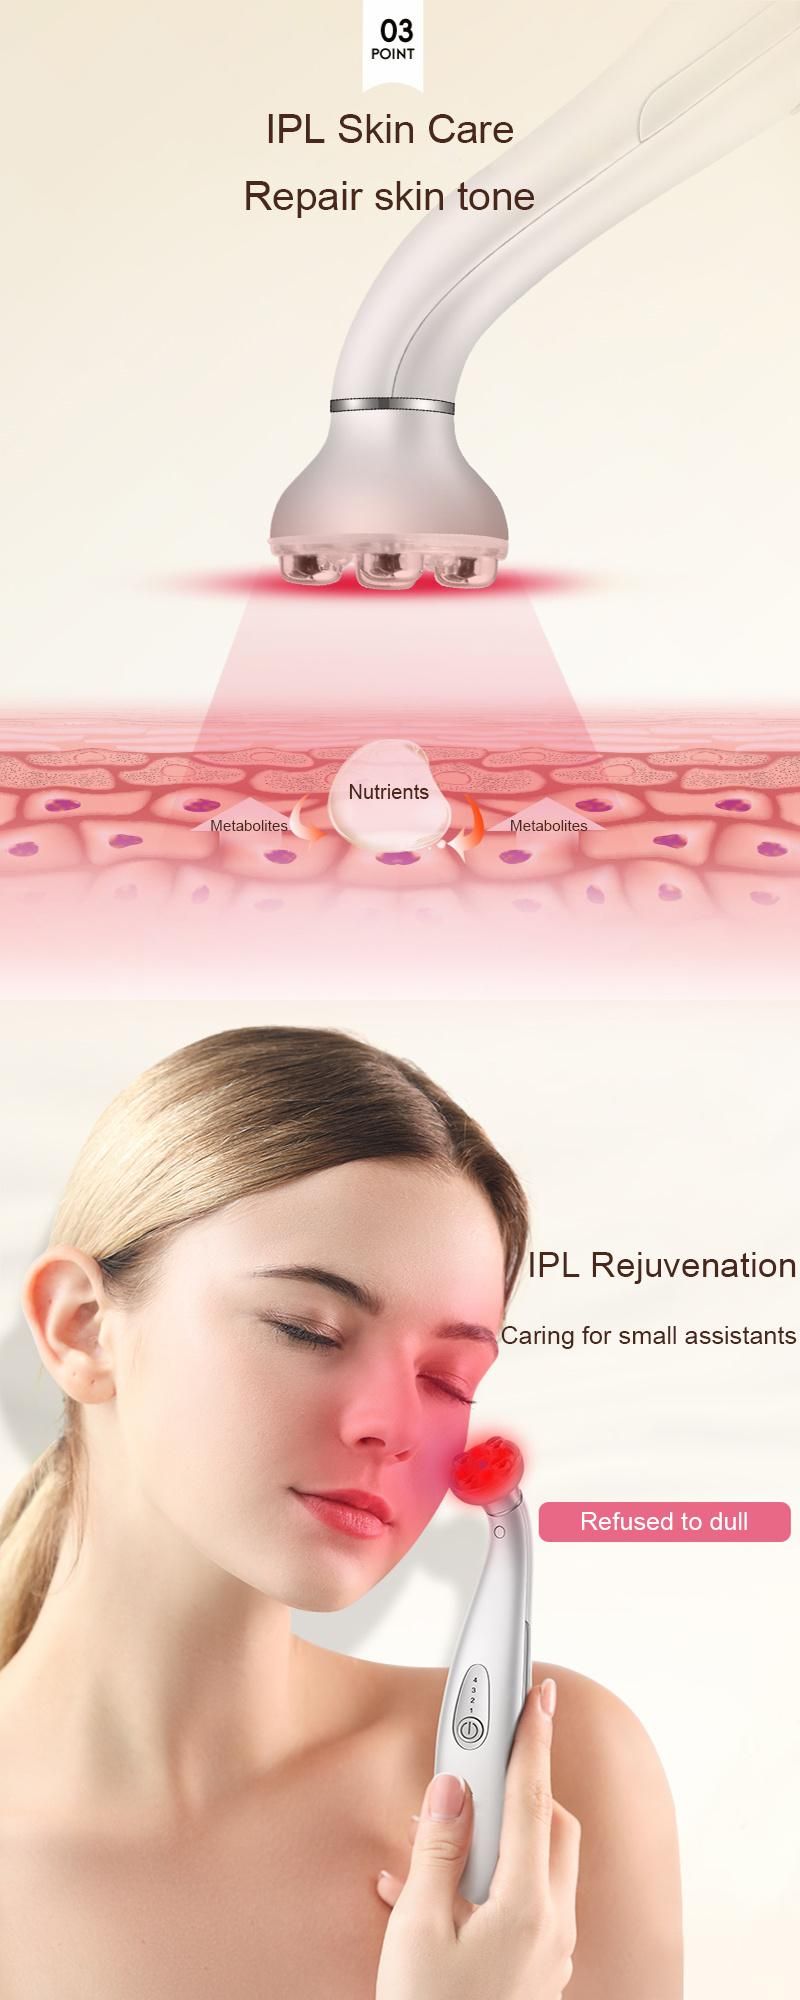 Beauty Devices Skin Rejuvenation Radio Frequency Beauty Instrument Eye Massager Home Radio Frequency Instrument